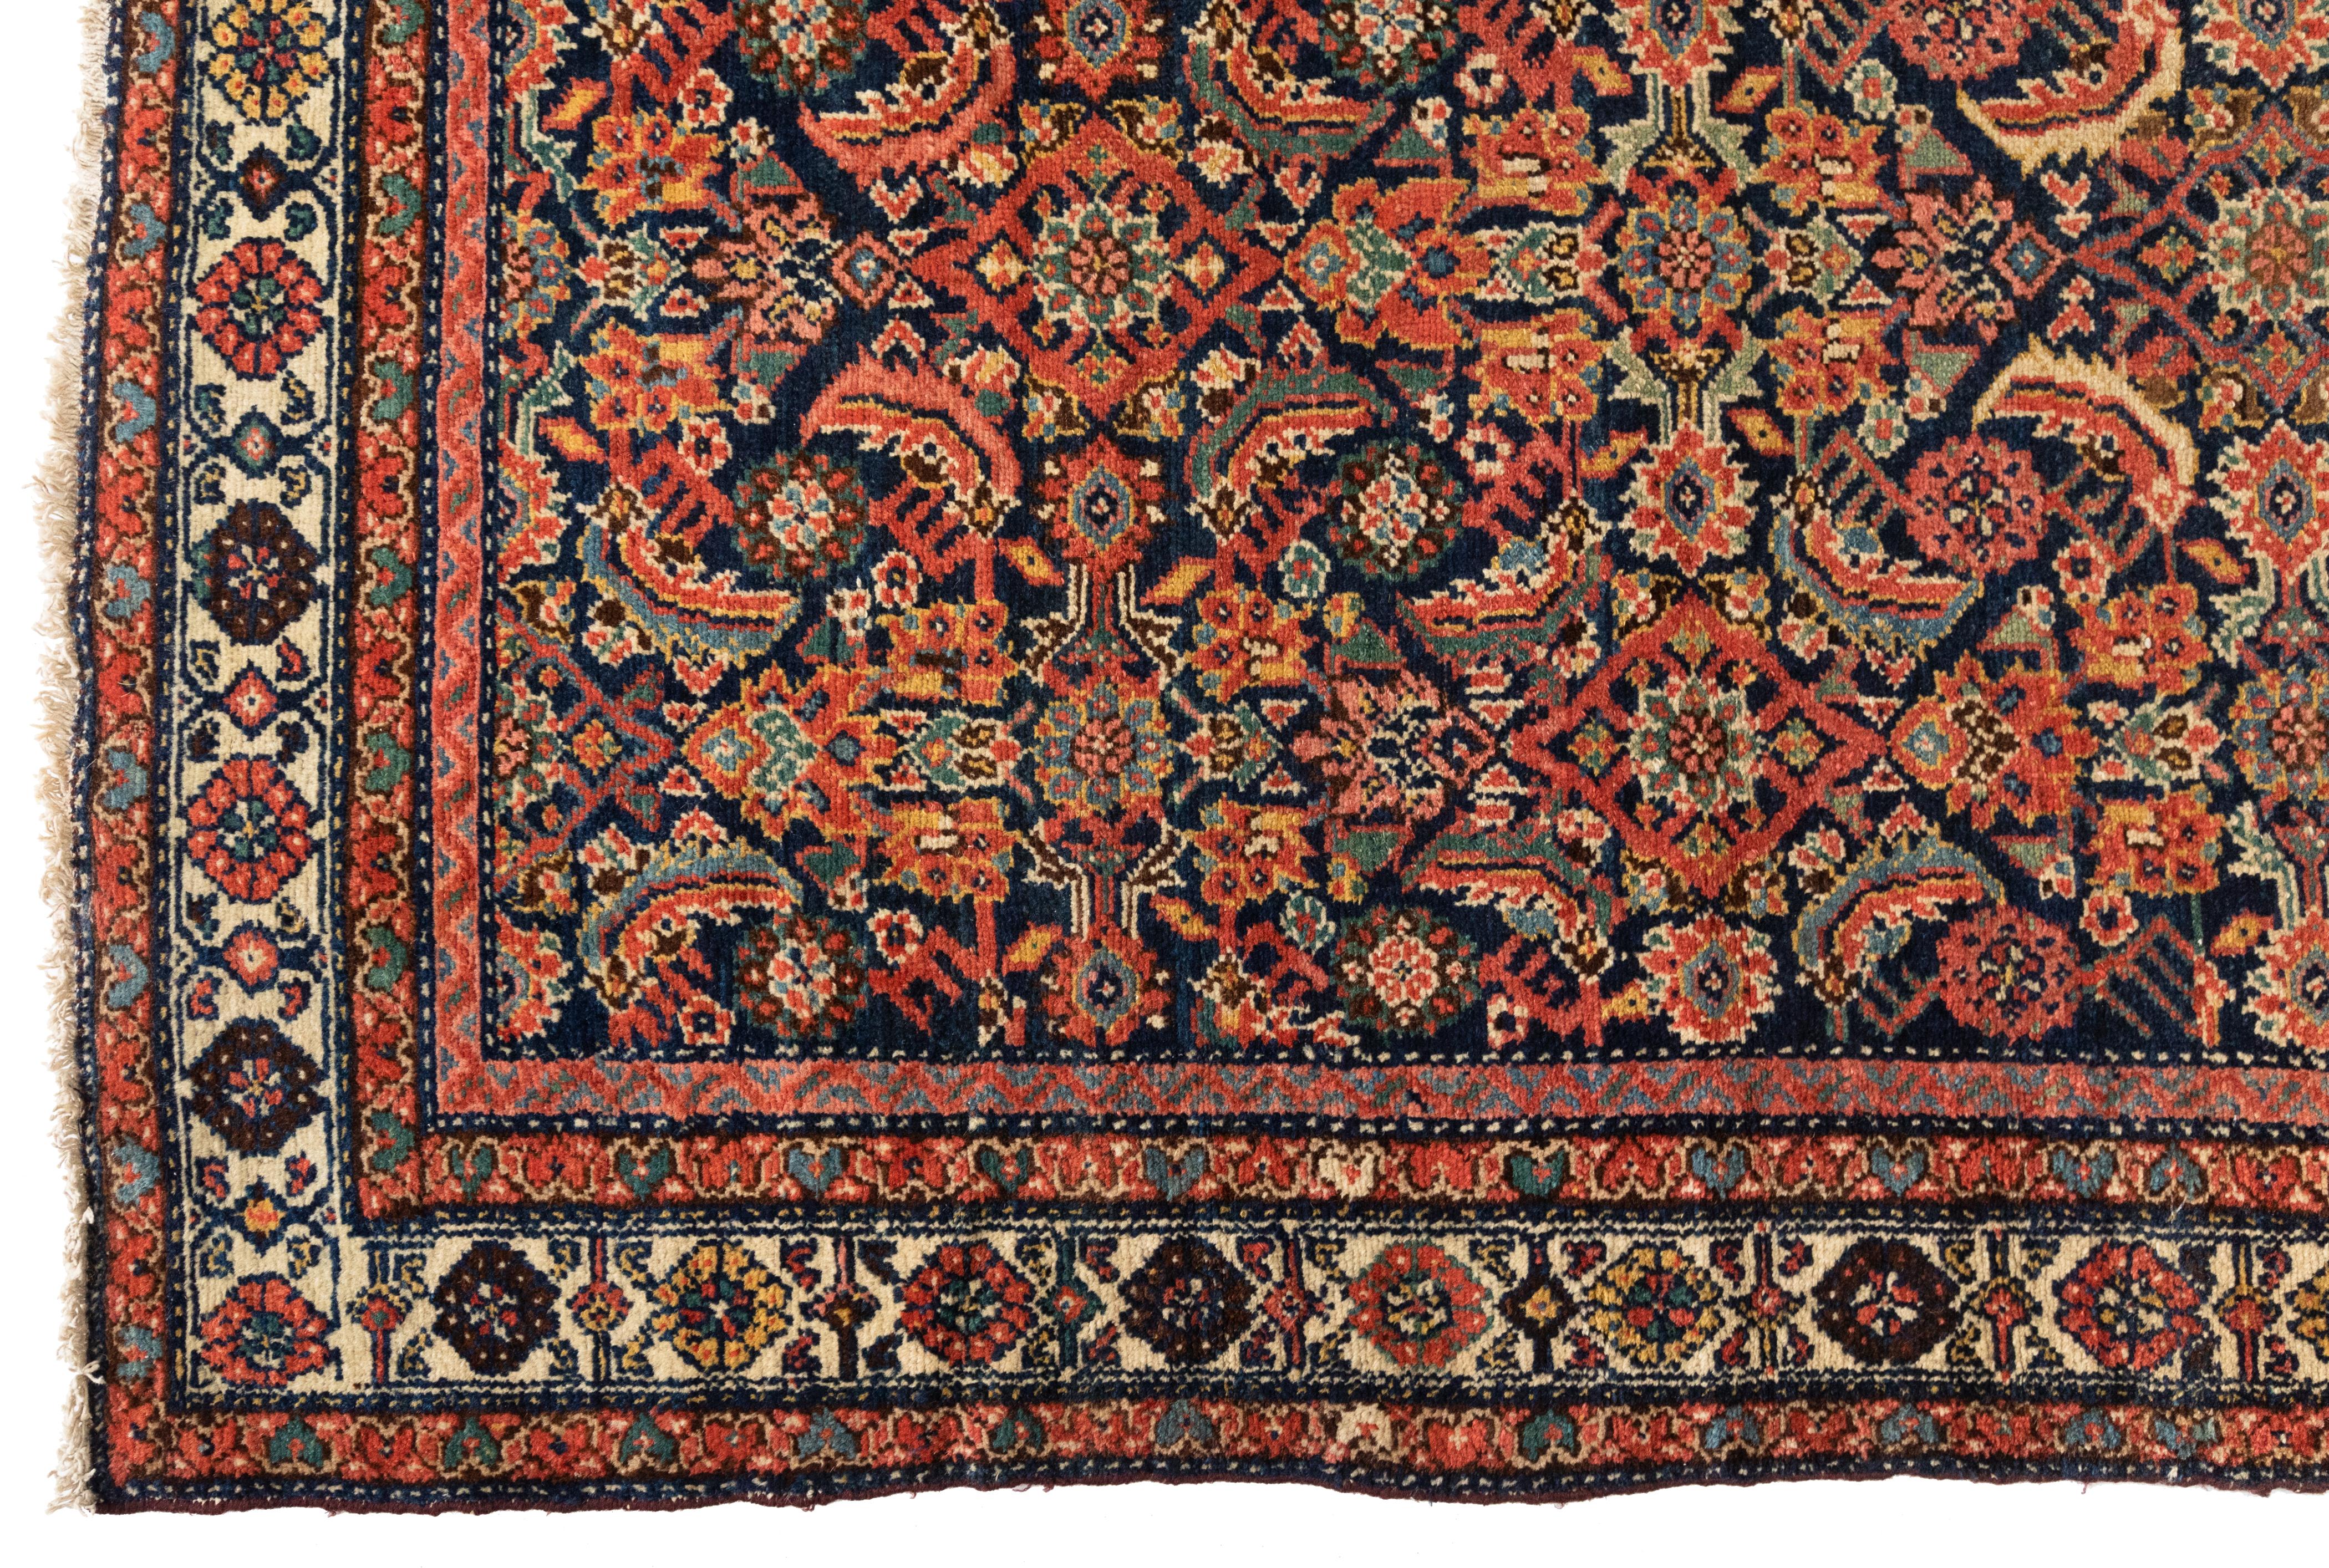 This is a fine example of an antique Malayer dating from the 1880-1900s measuring: 6.2 x 16.2 ft.

Antique Malayer rugs were woven in the small town of Malayer, located south of Hamedan on the road to Arak. The location in relation to these towns is